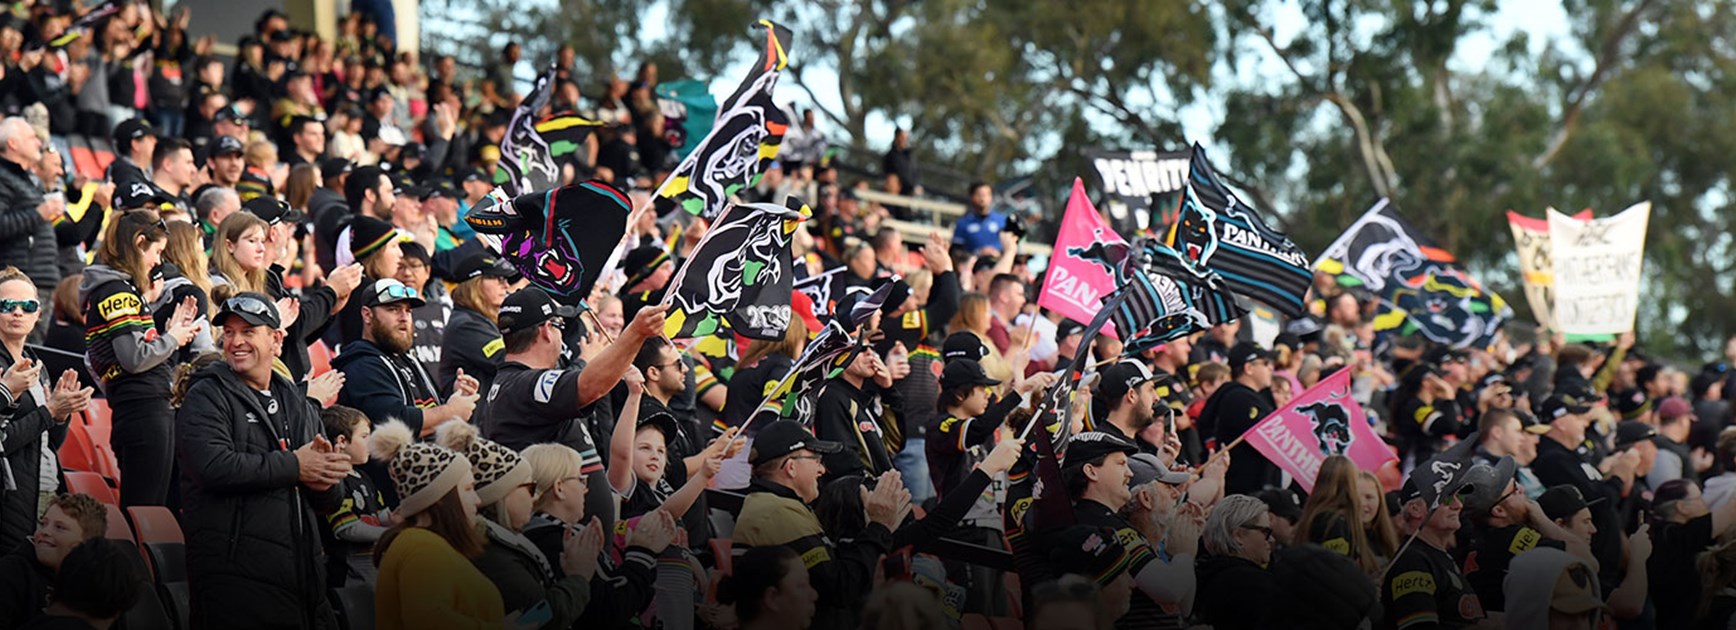 Members Ticket Information: Panthers v Raiders